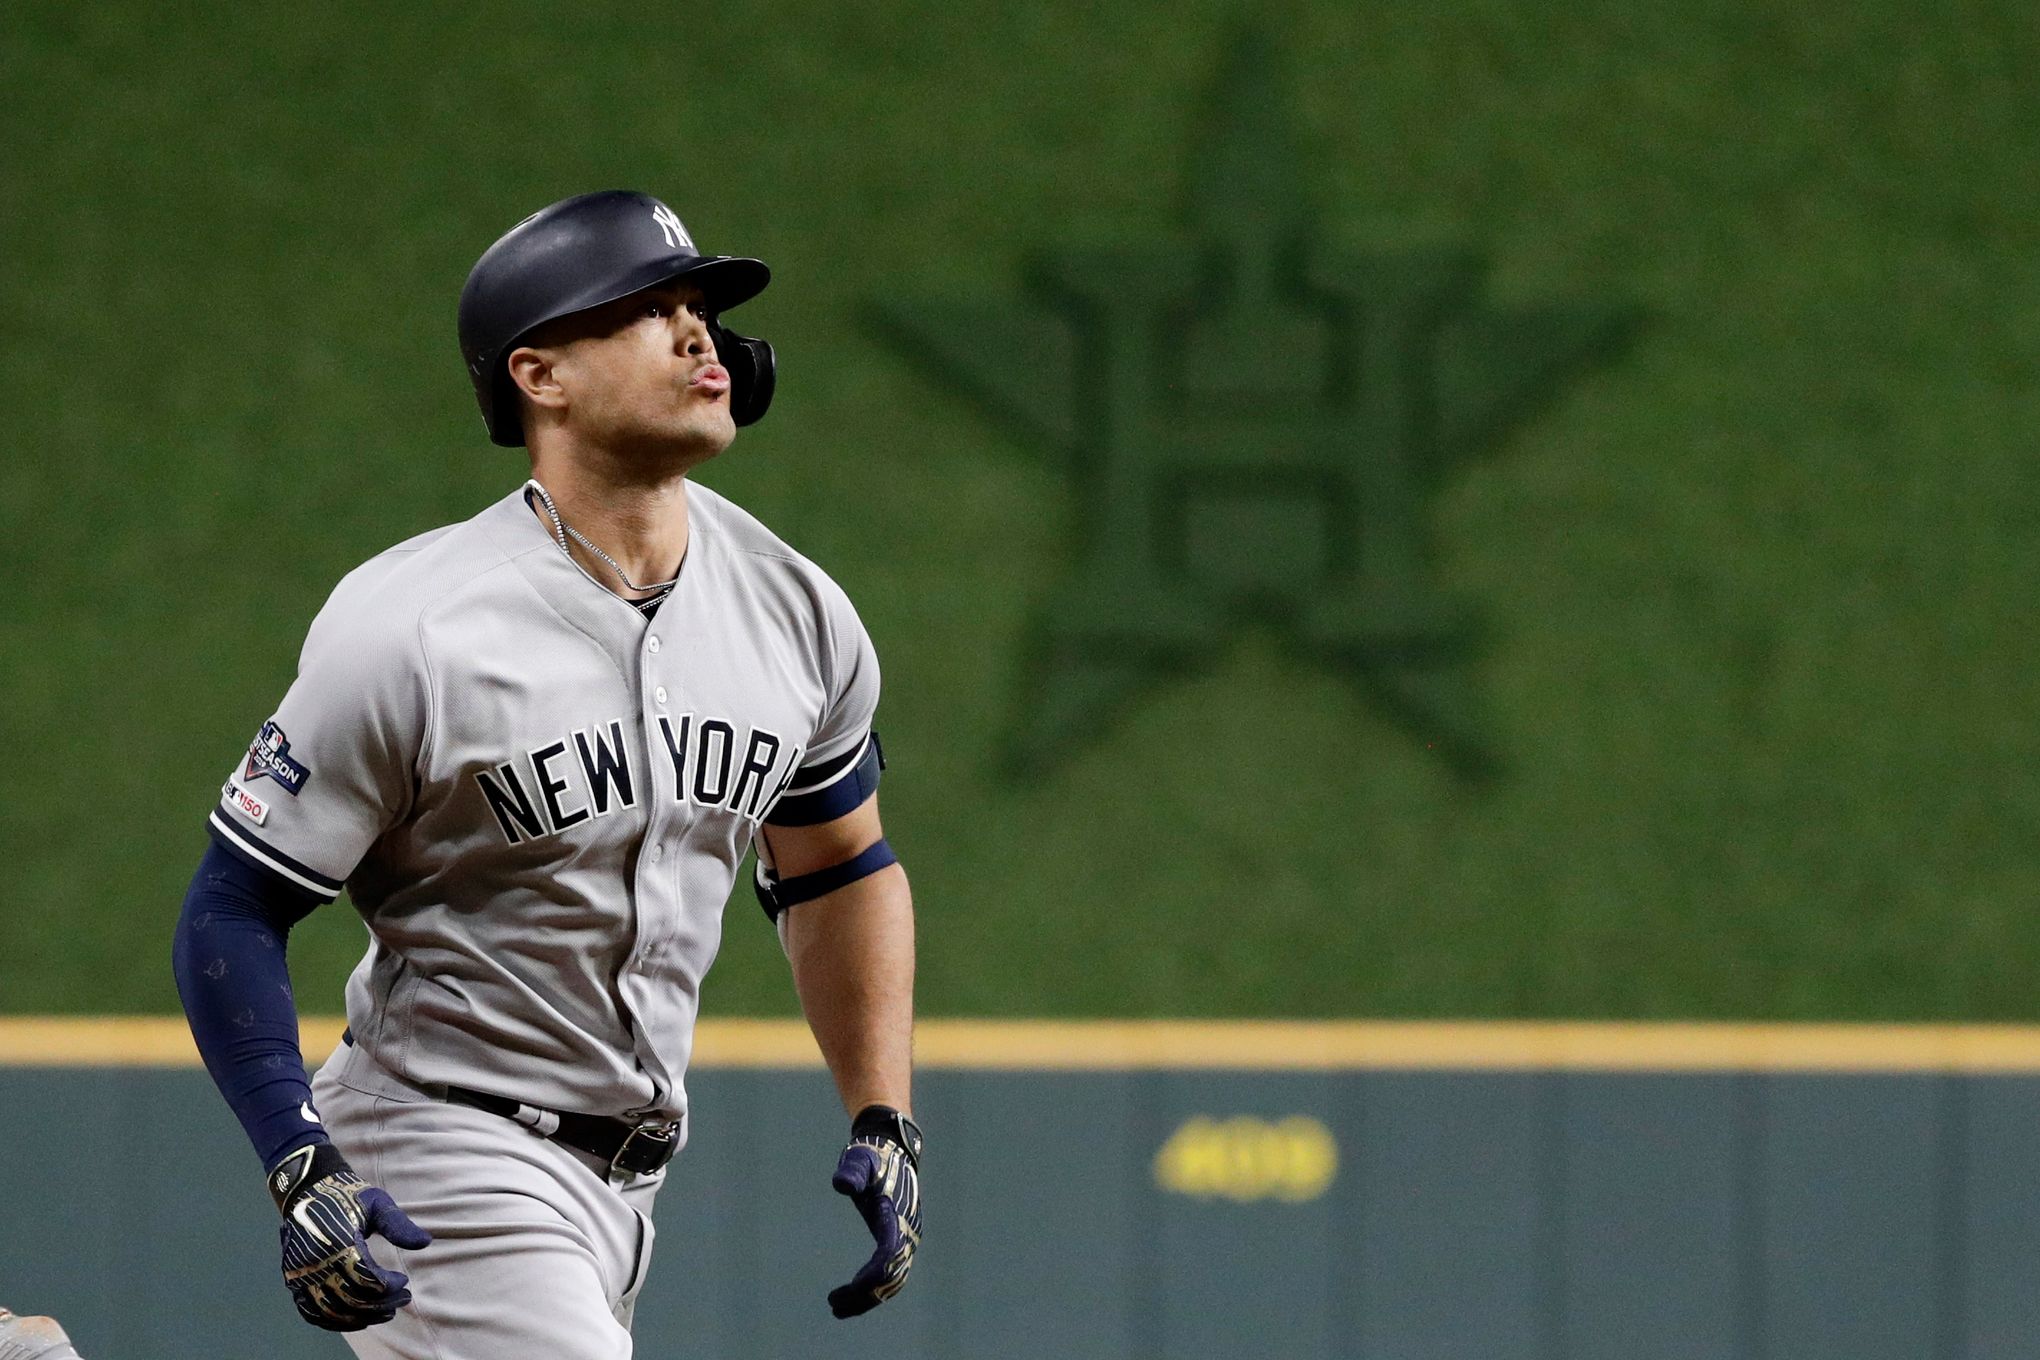 New York Yankees' Giancarlo Stanton rounds the bases after hitting